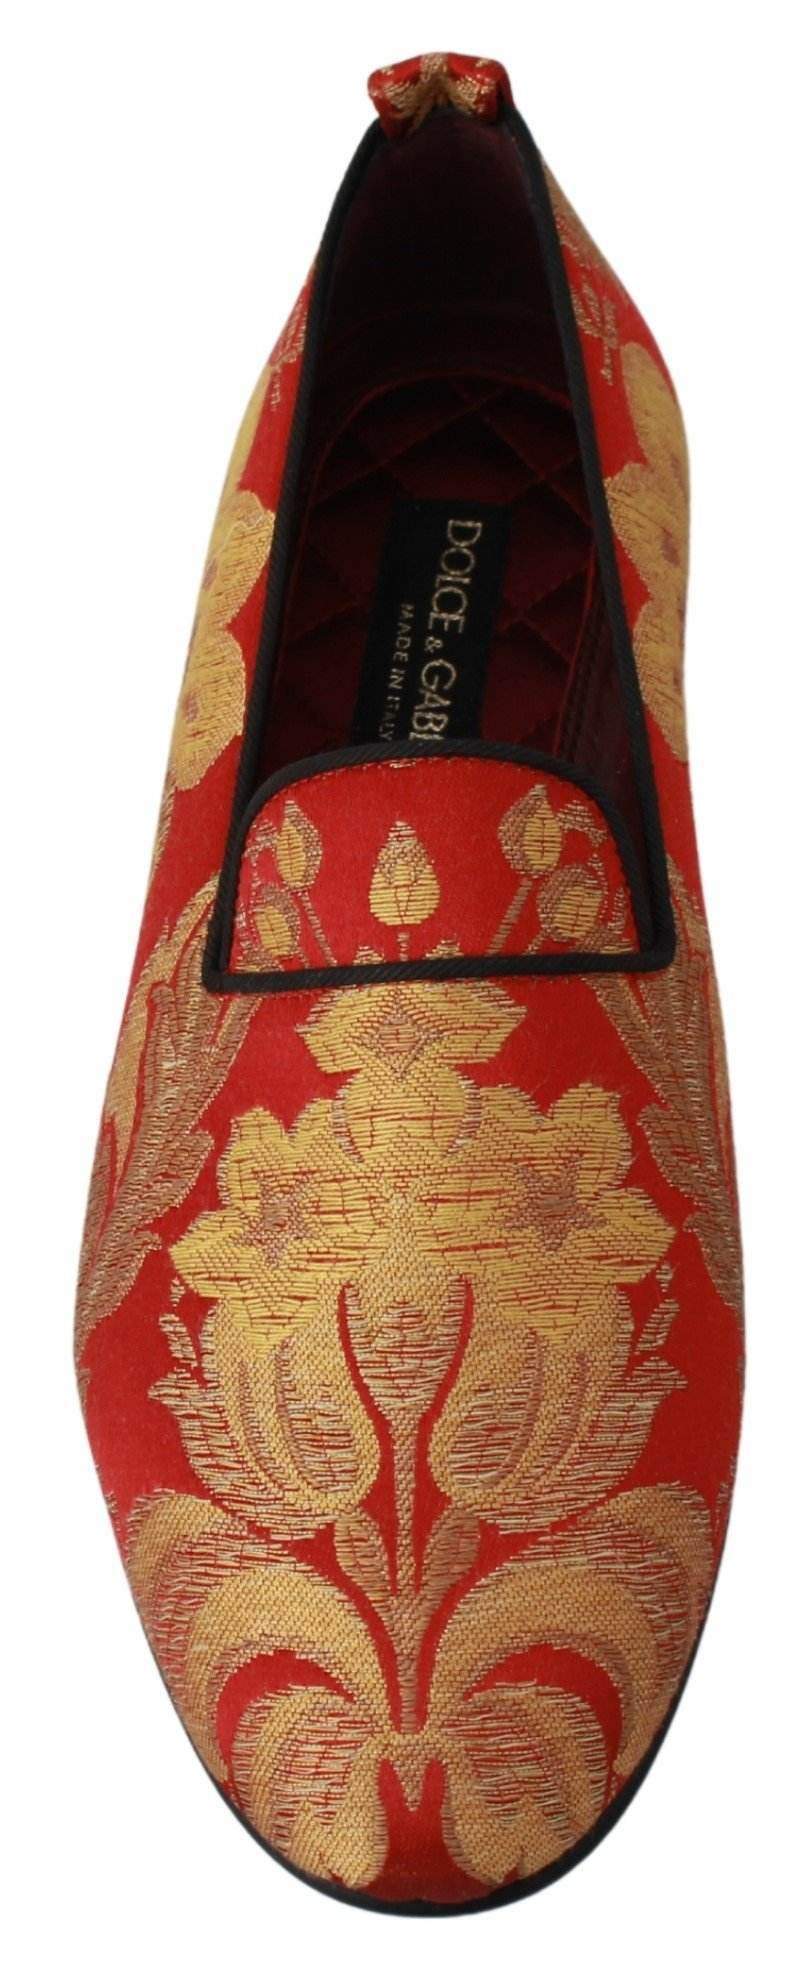 Dolce & Gabbana Red Gold Brocade Slippers Loafers Shoes #men, Brand_Dolce & Gabbana, Catch, Category_Shoes, Dolce & Gabbana, EU39/US6, EU40/US7, EU41/US8, EU42/US9, EU43/US10, EU45/US12, feed-agegroup-adult, feed-color-gold, feed-gender-male, feed-size-US6, feed-size-US7, feed-size-US8, Gender_Men, Kogan, Loafers - Men - Shoes, Rose Gold, Shoes - New Arrivals at SEYMAYKA